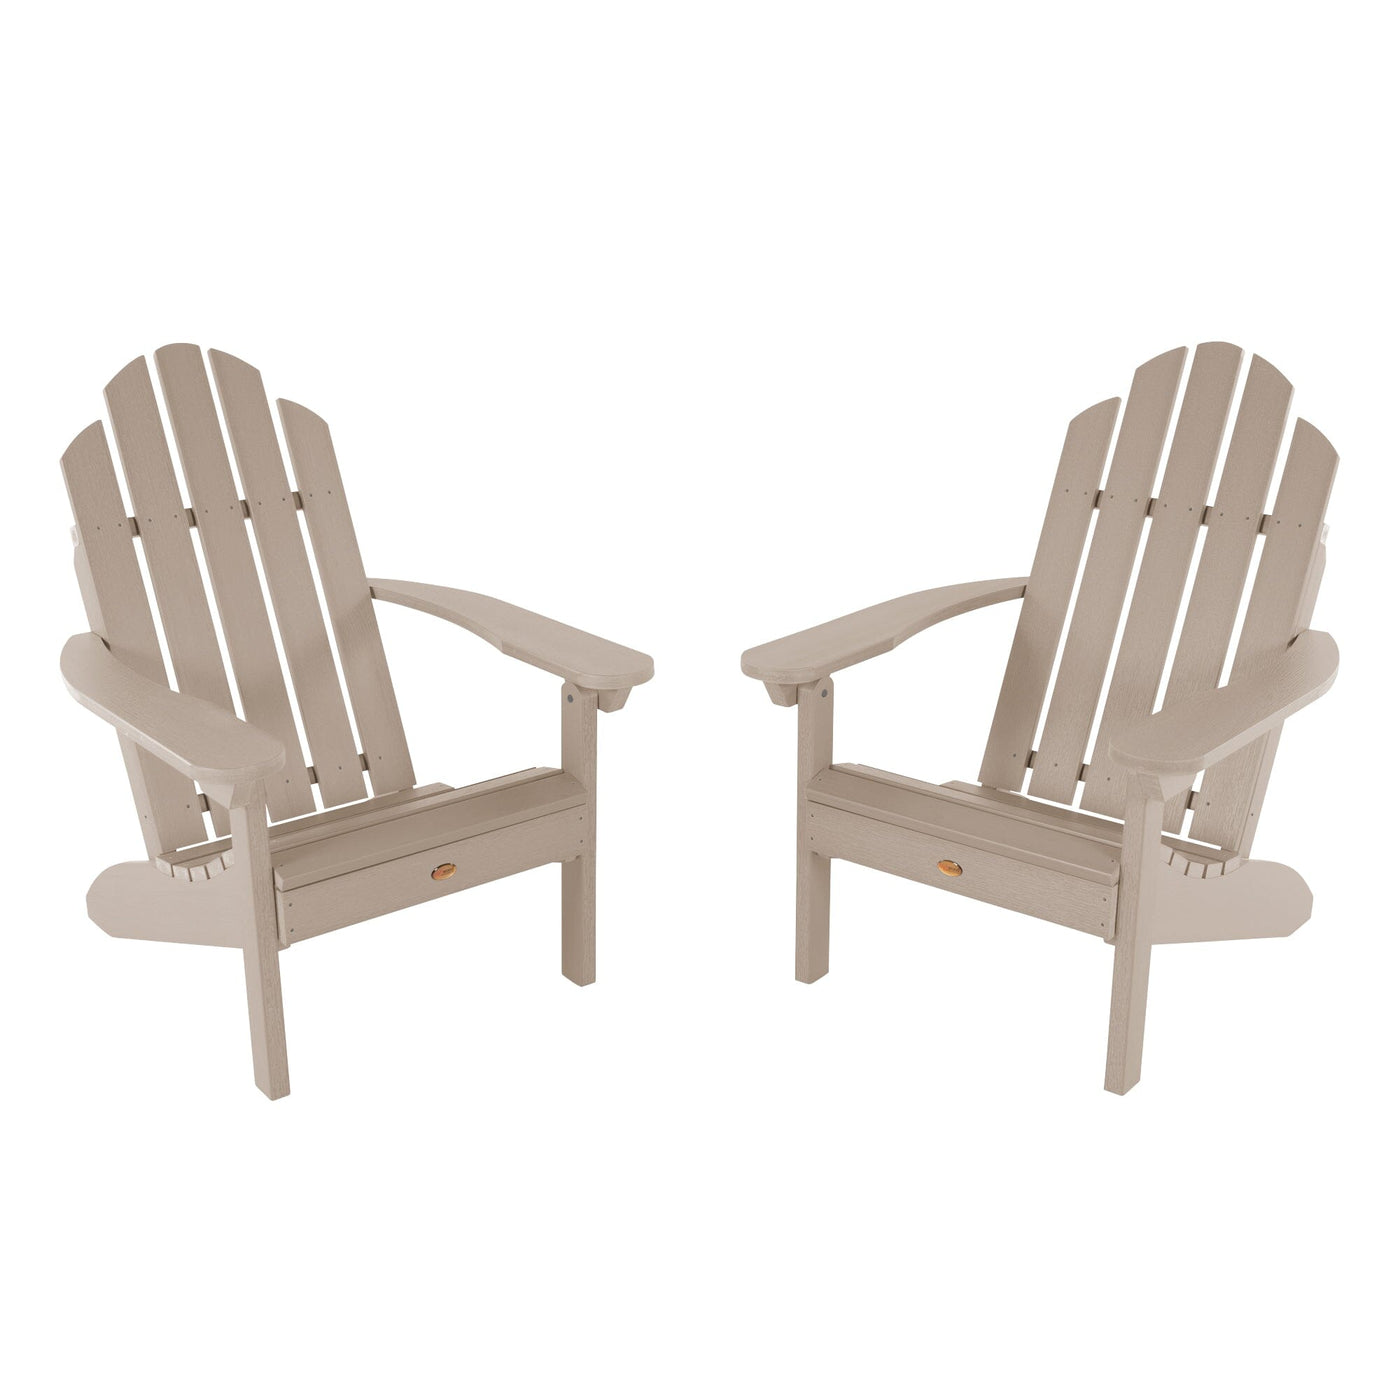 Set of Two Classic Westport Adirondack Chairs Kitted Sets Highwood USA Woodland Brown 